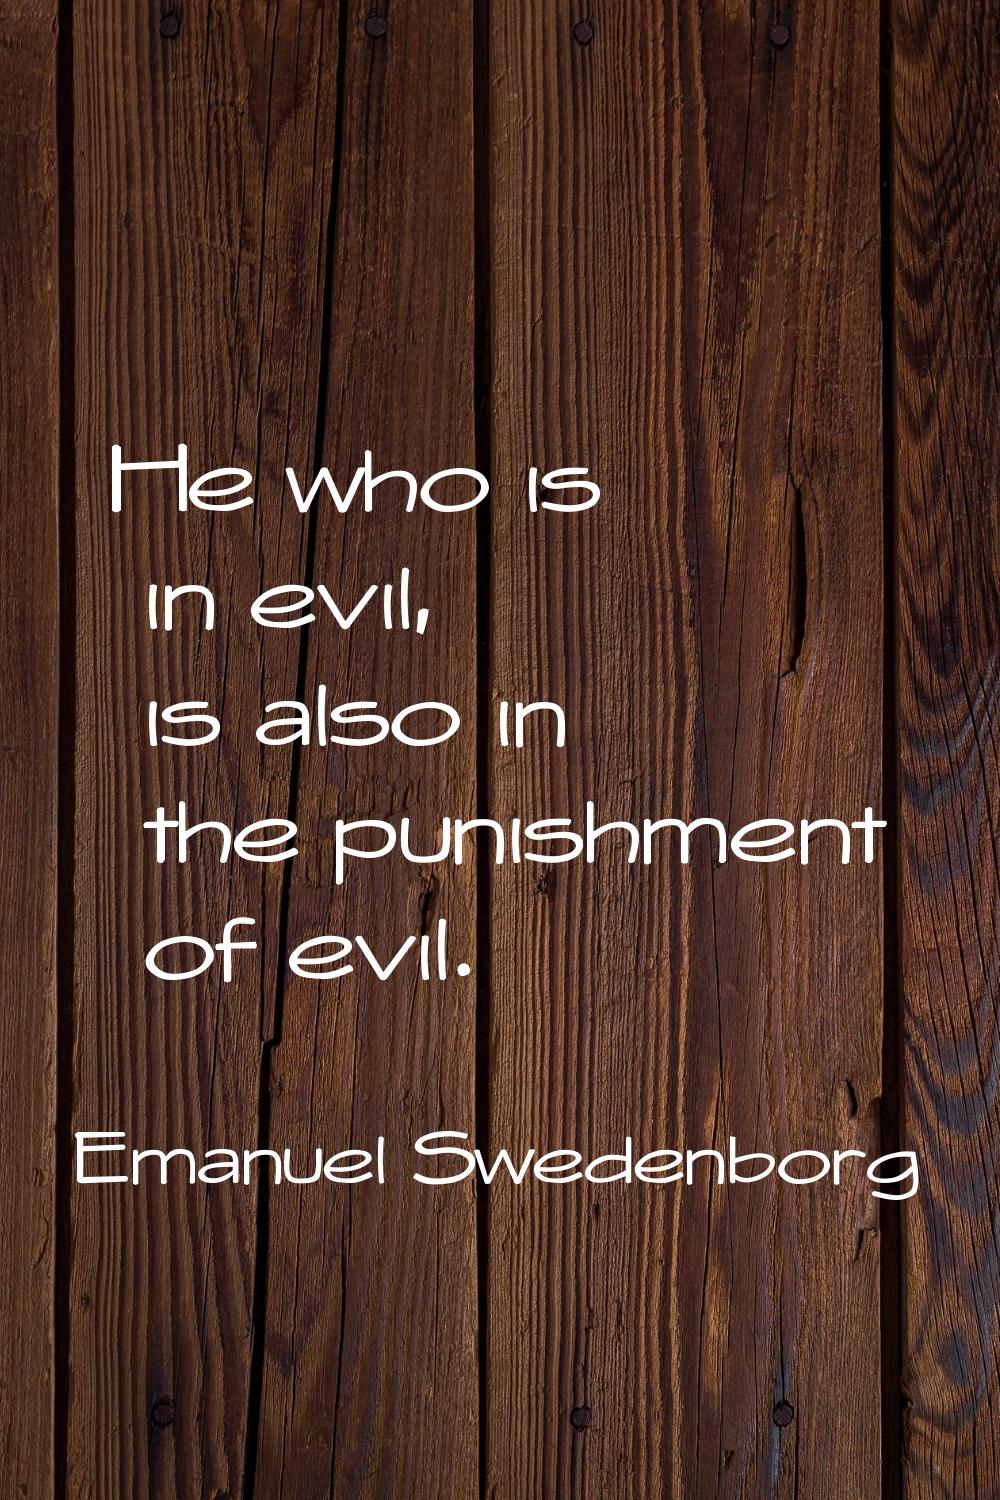 He who is in evil, is also in the punishment of evil.